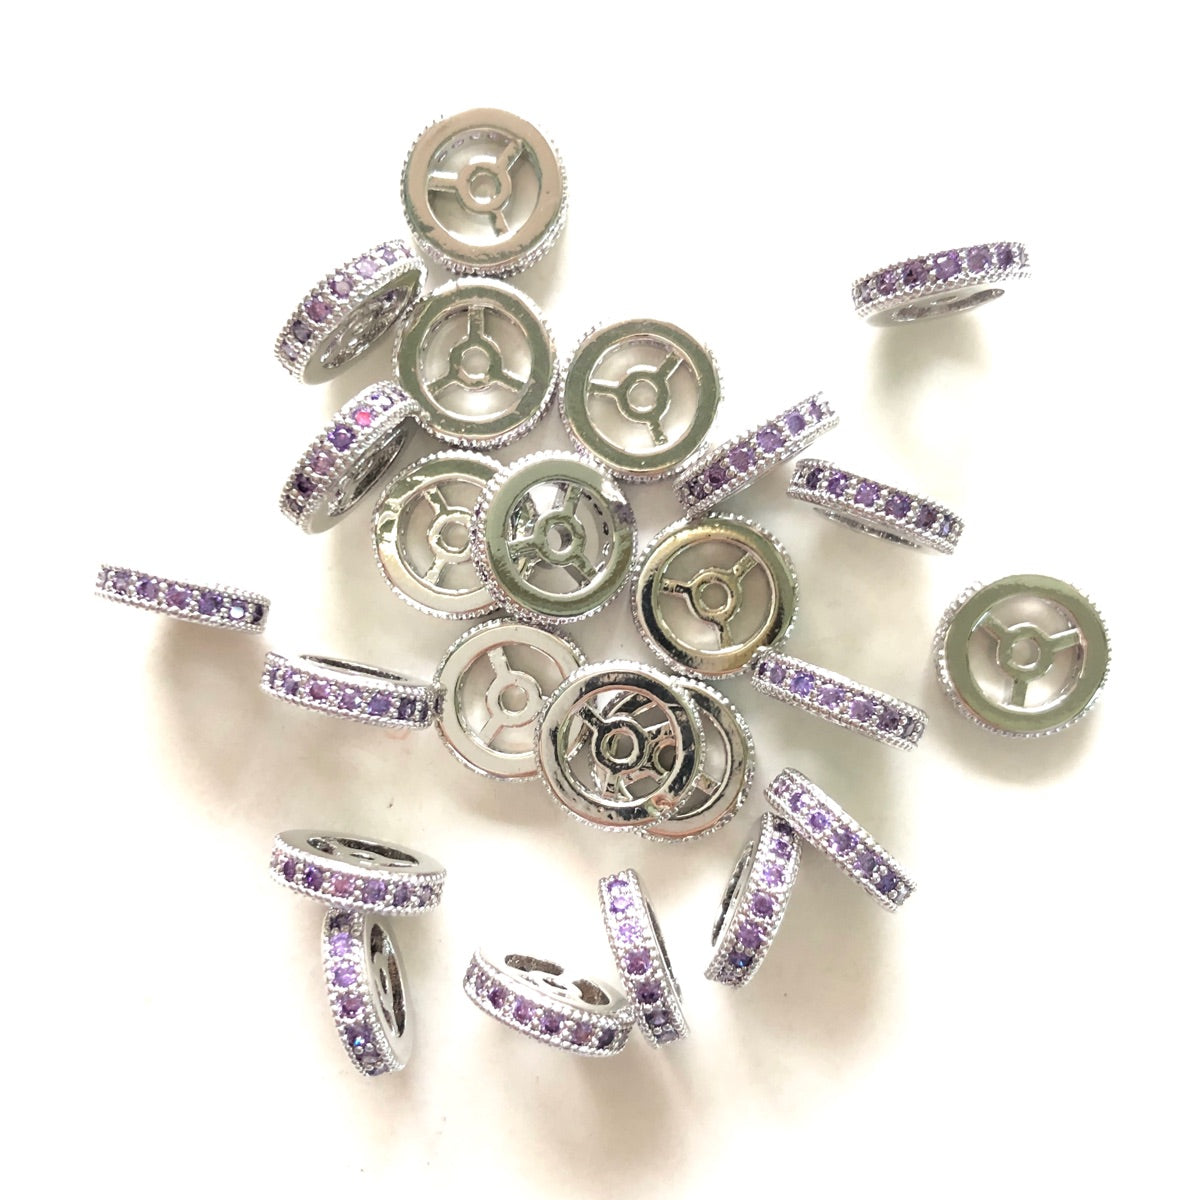 20pcs/lot 9.6/12mm Purple CZ Paved Wheel Rondelle Spacers Silver CZ Paved Spacers New Spacers Arrivals Rondelle Beads Charms Beads Beyond